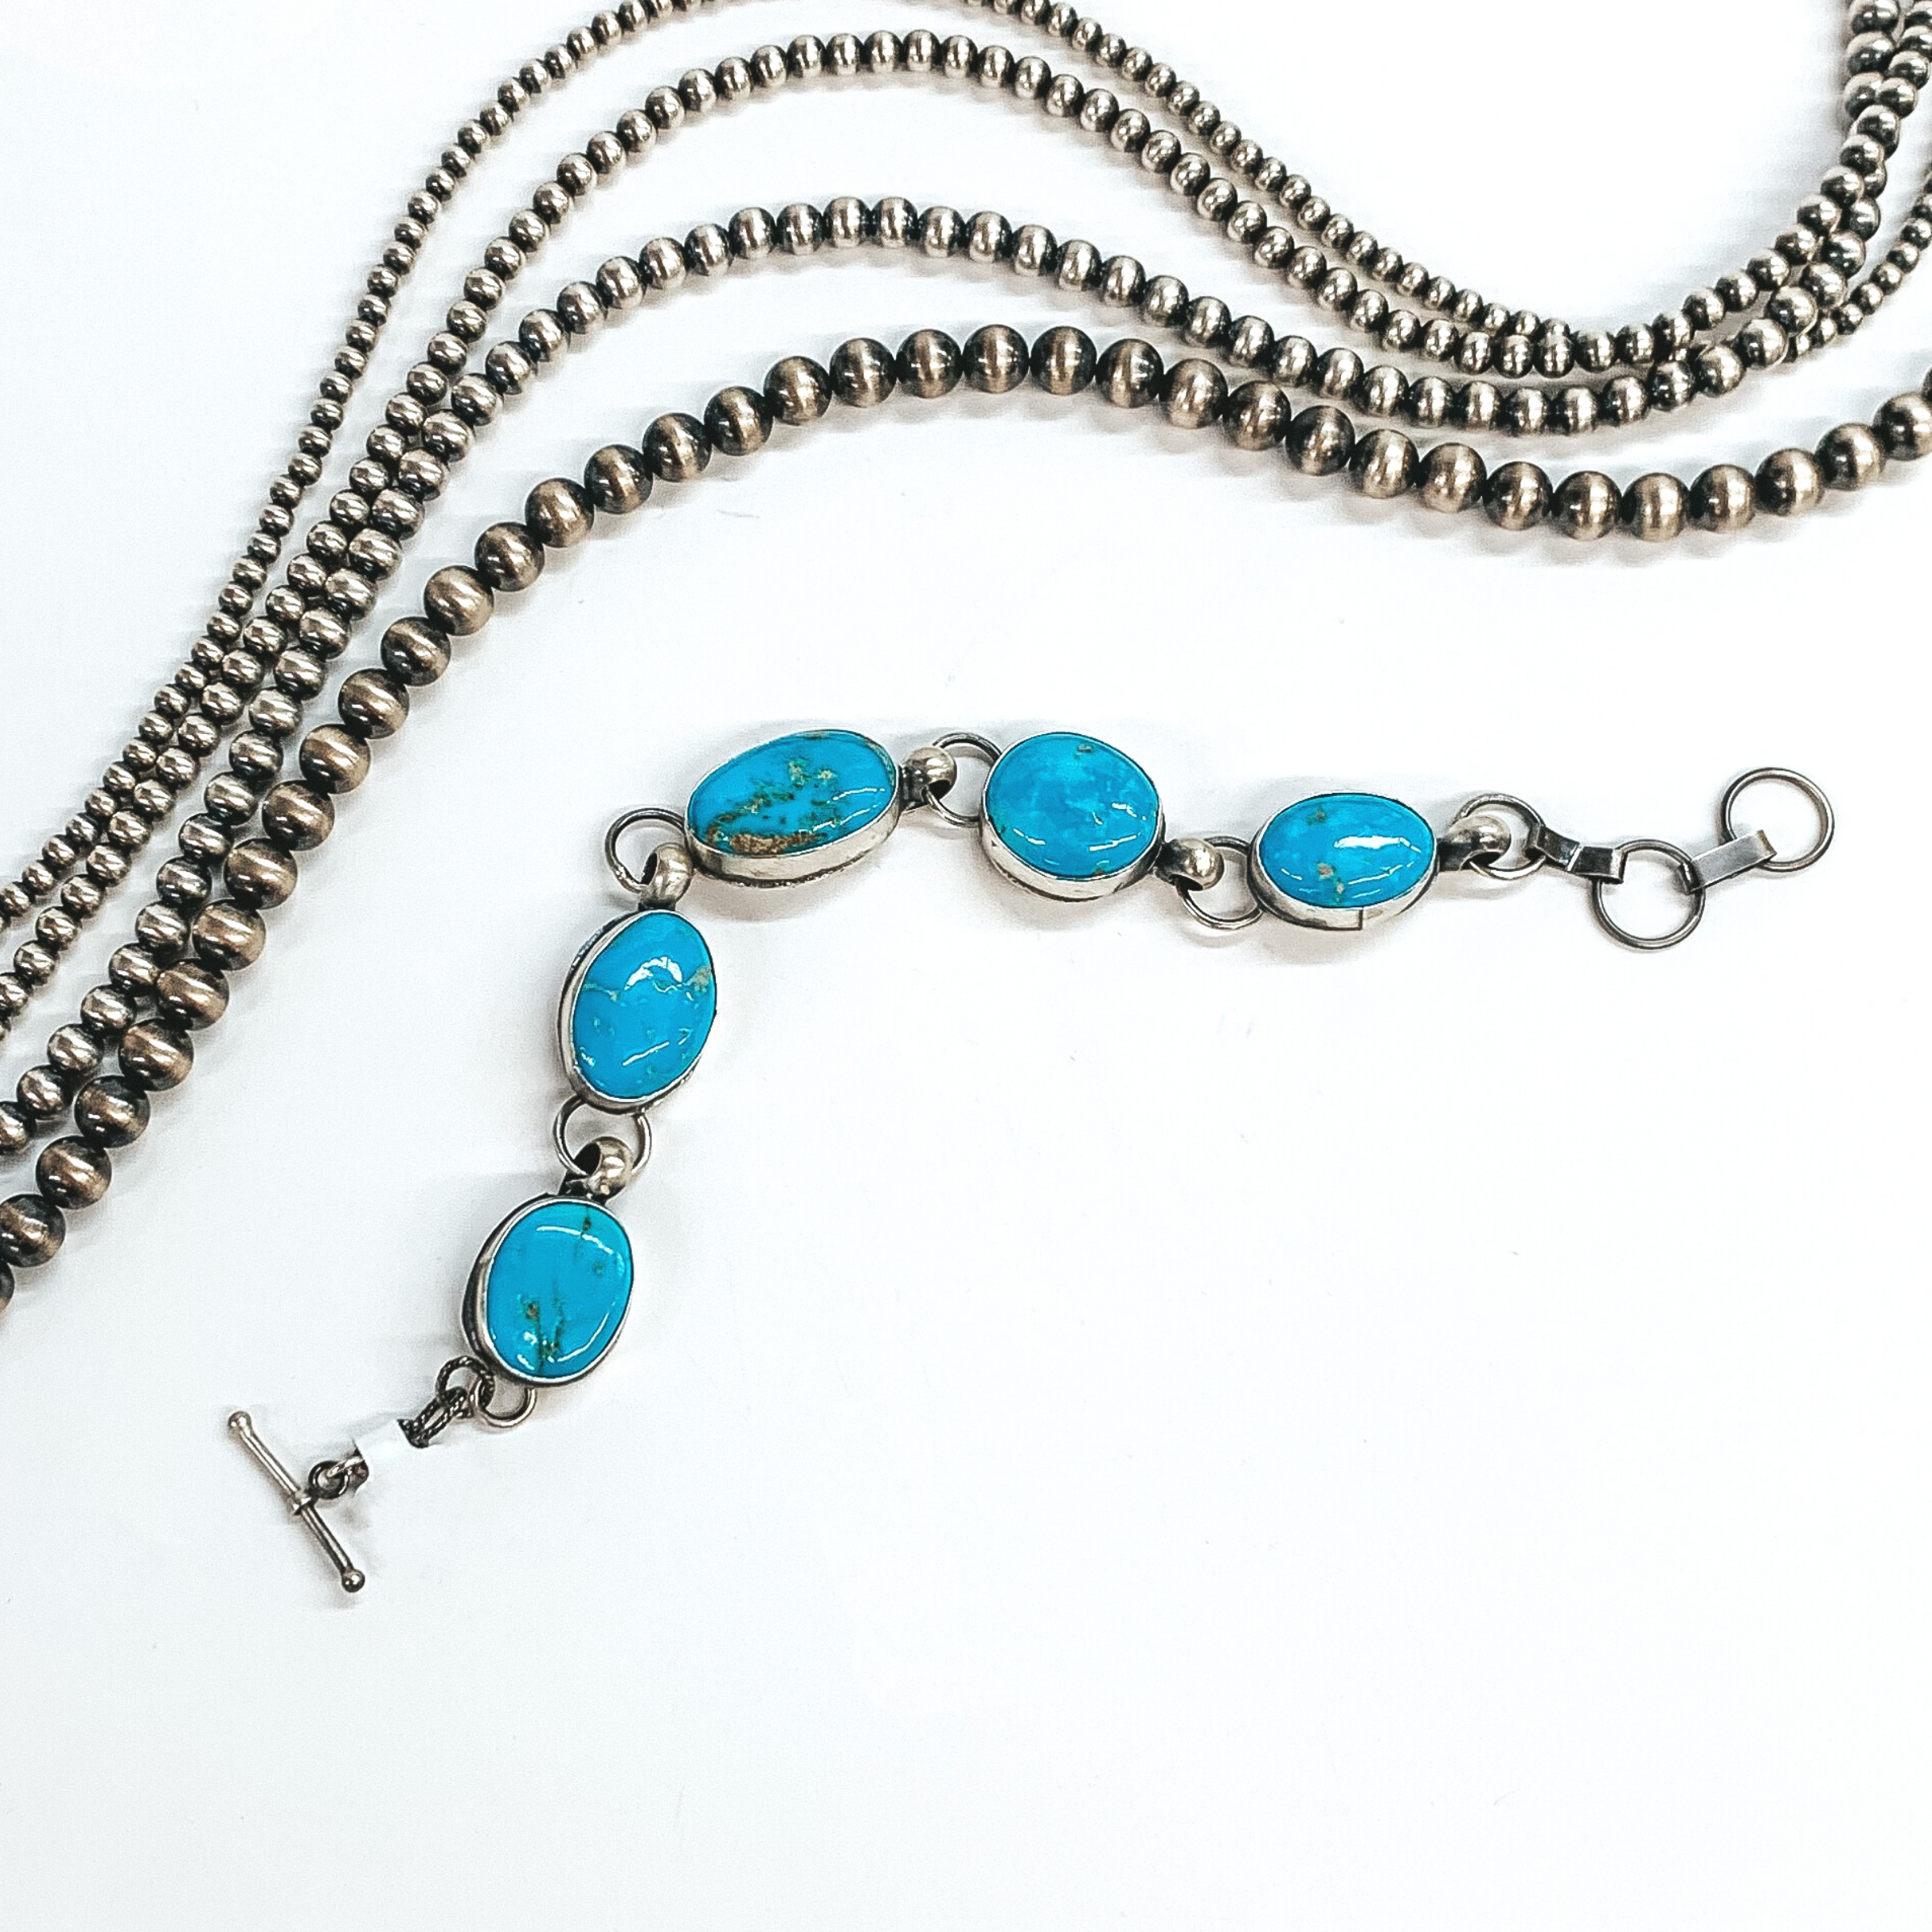 Boyd Ashley | Navajo Handmade Sterling Silver Chain Link Bracelet with Kingman Turquoise Stones - Giddy Up Glamour Boutique